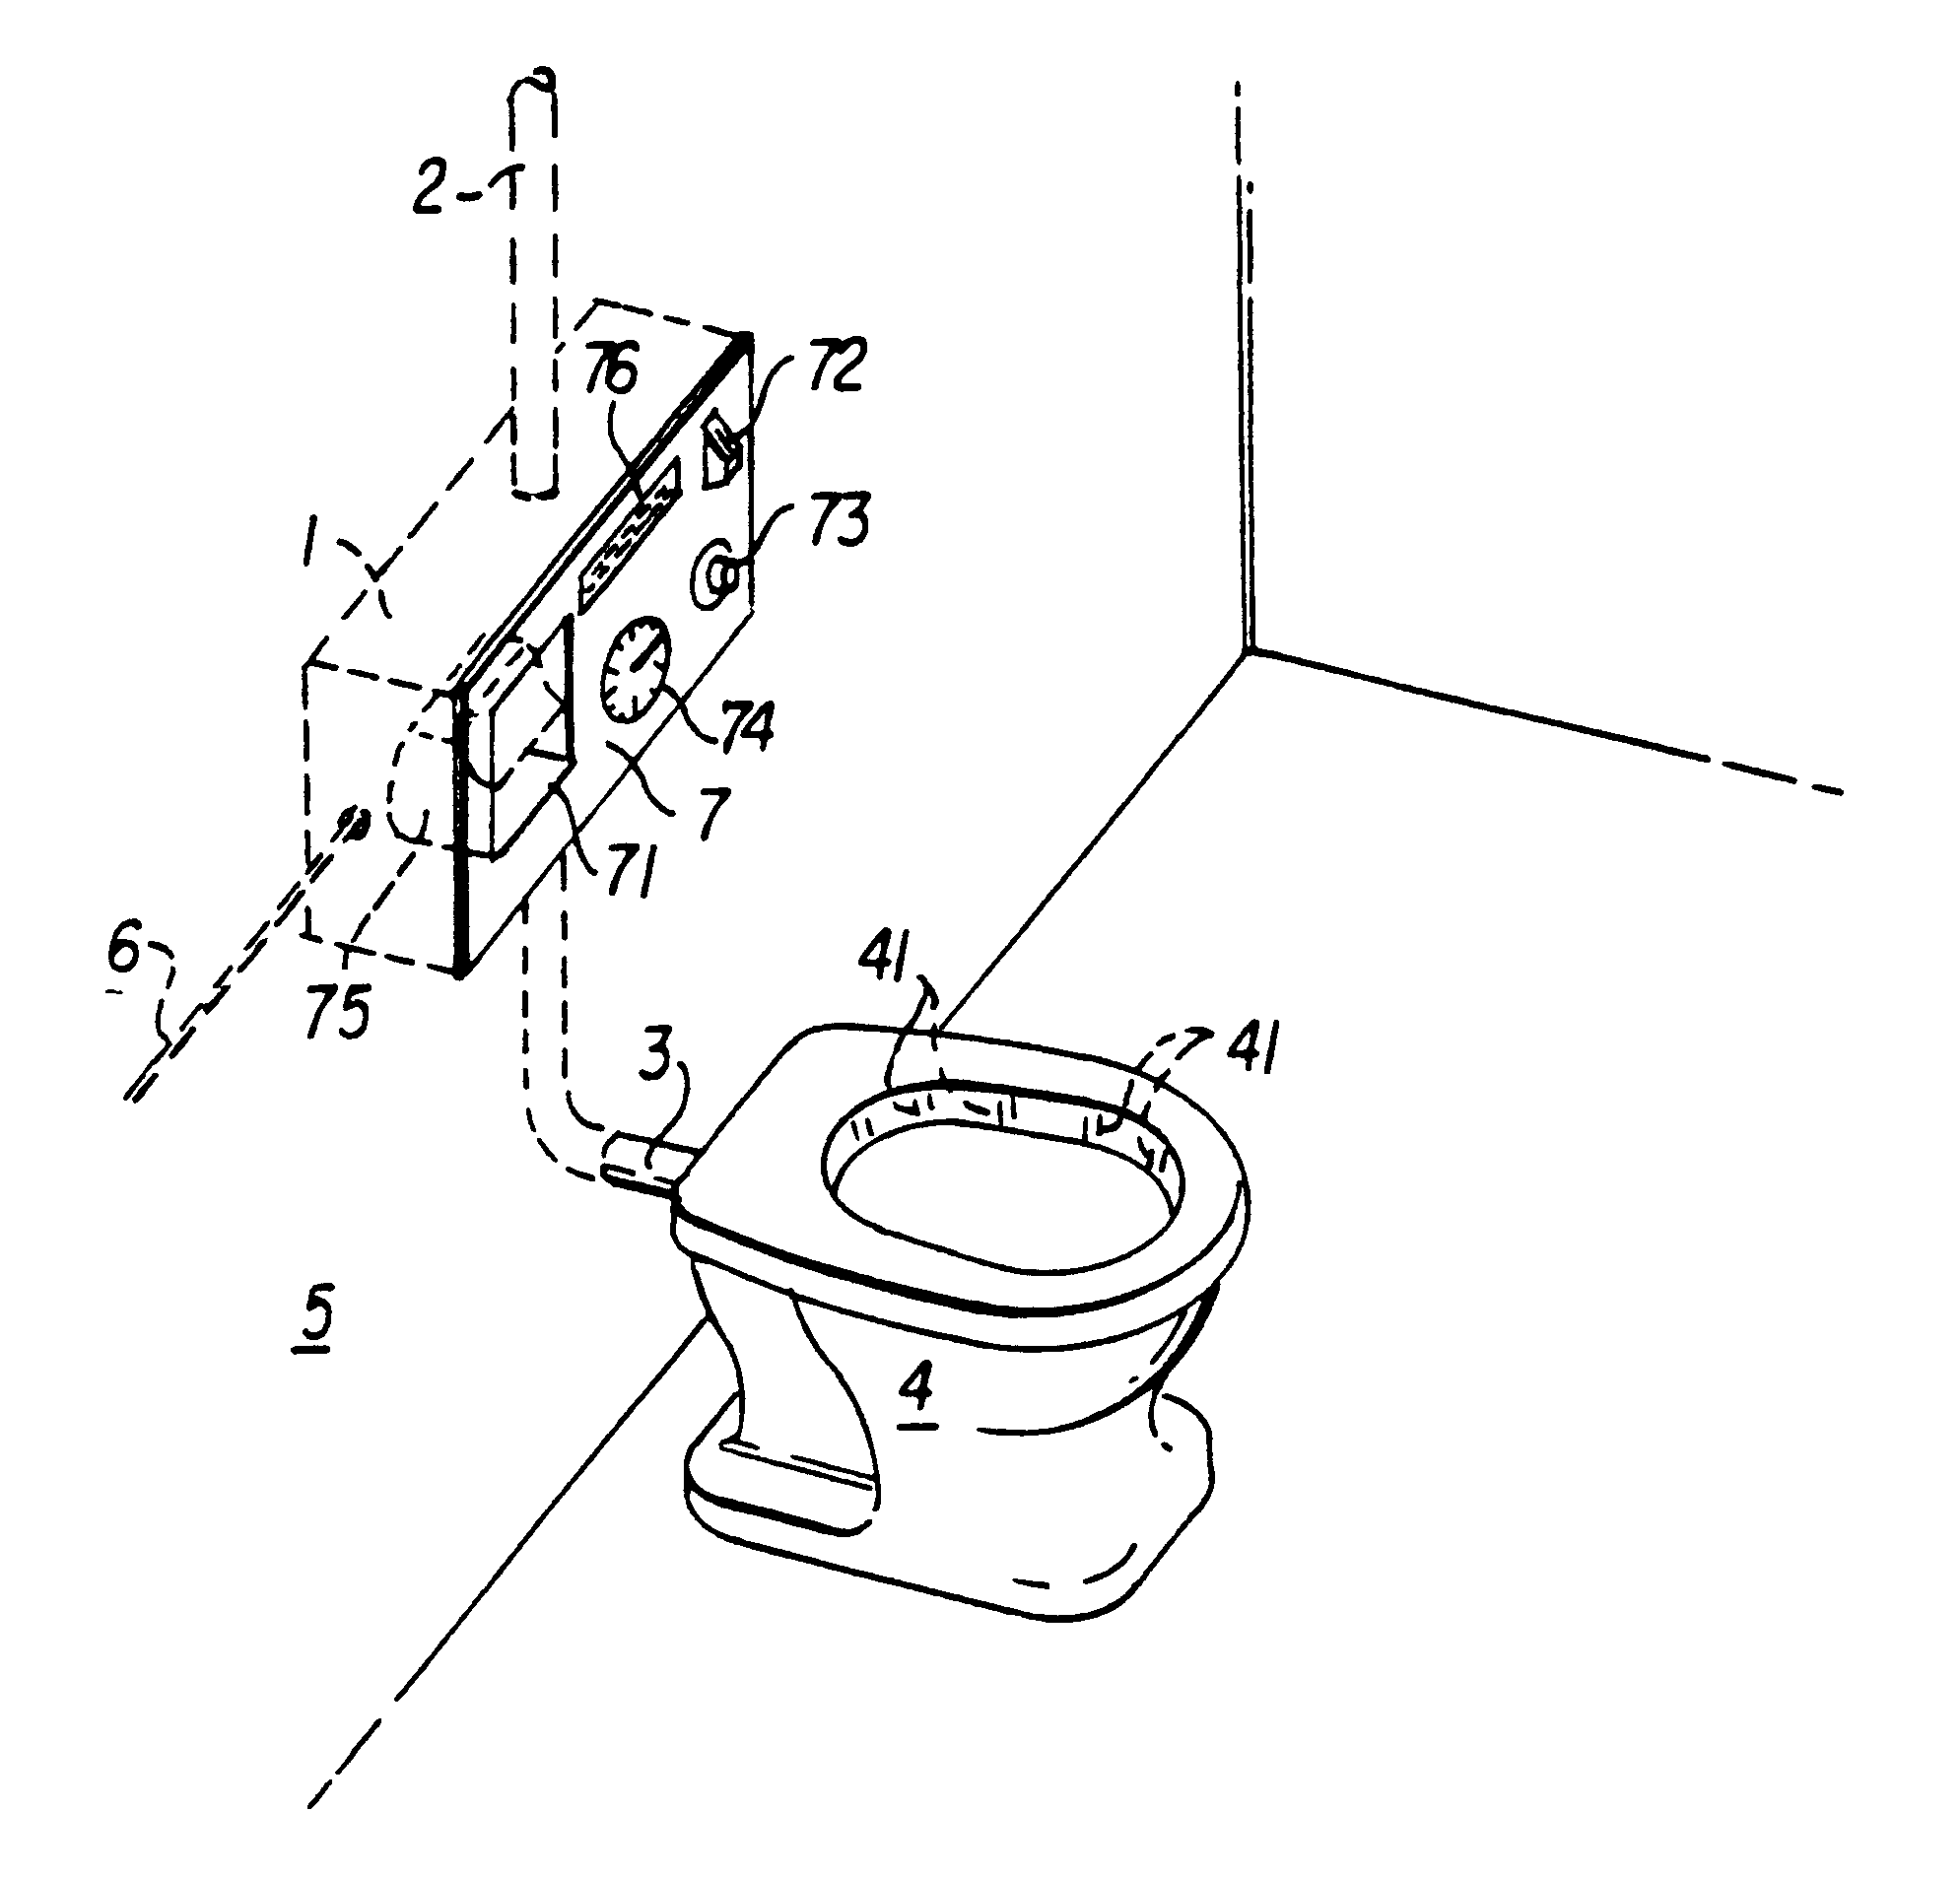 Flushing, cleaning device for service of sanitary fixtures